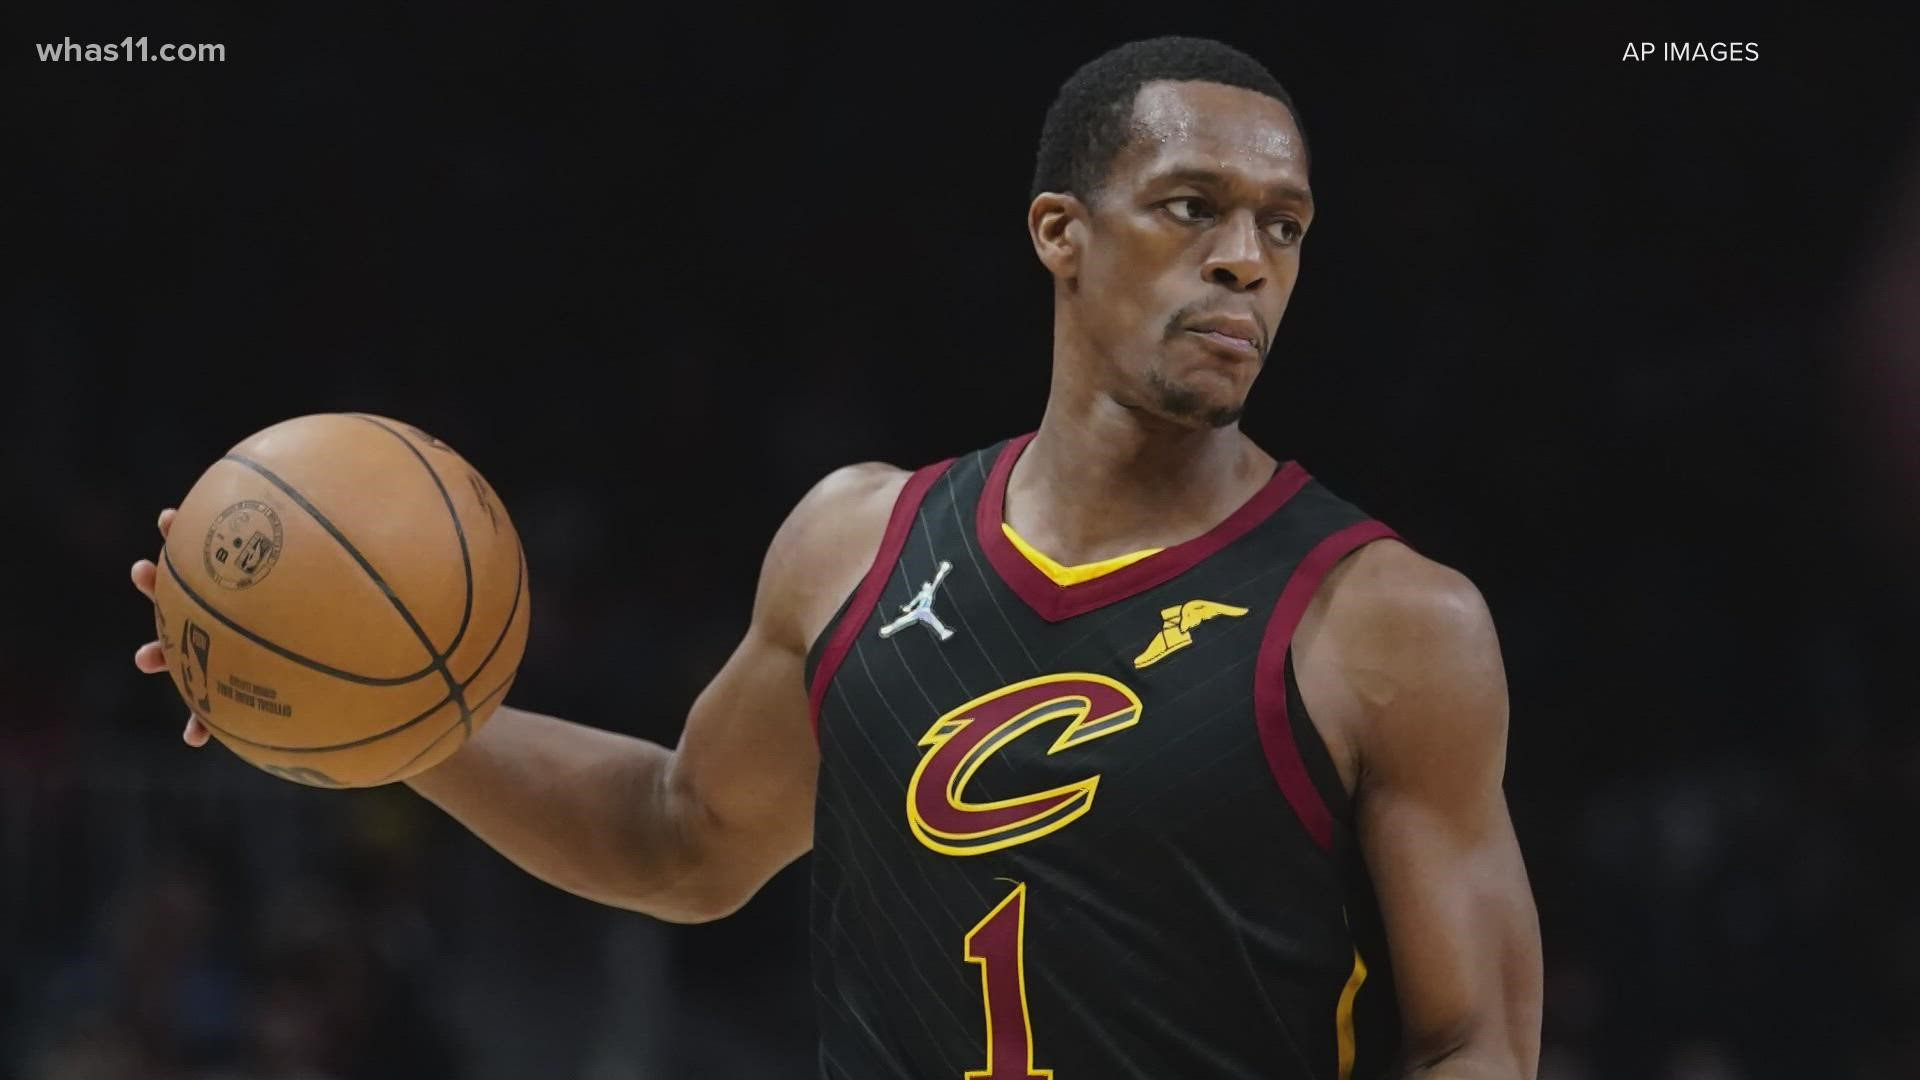 According to court documents, a Louisville woman claims Rajon Rondo threatened her with a gun. The NBA says they are aware of the report and gathering information.